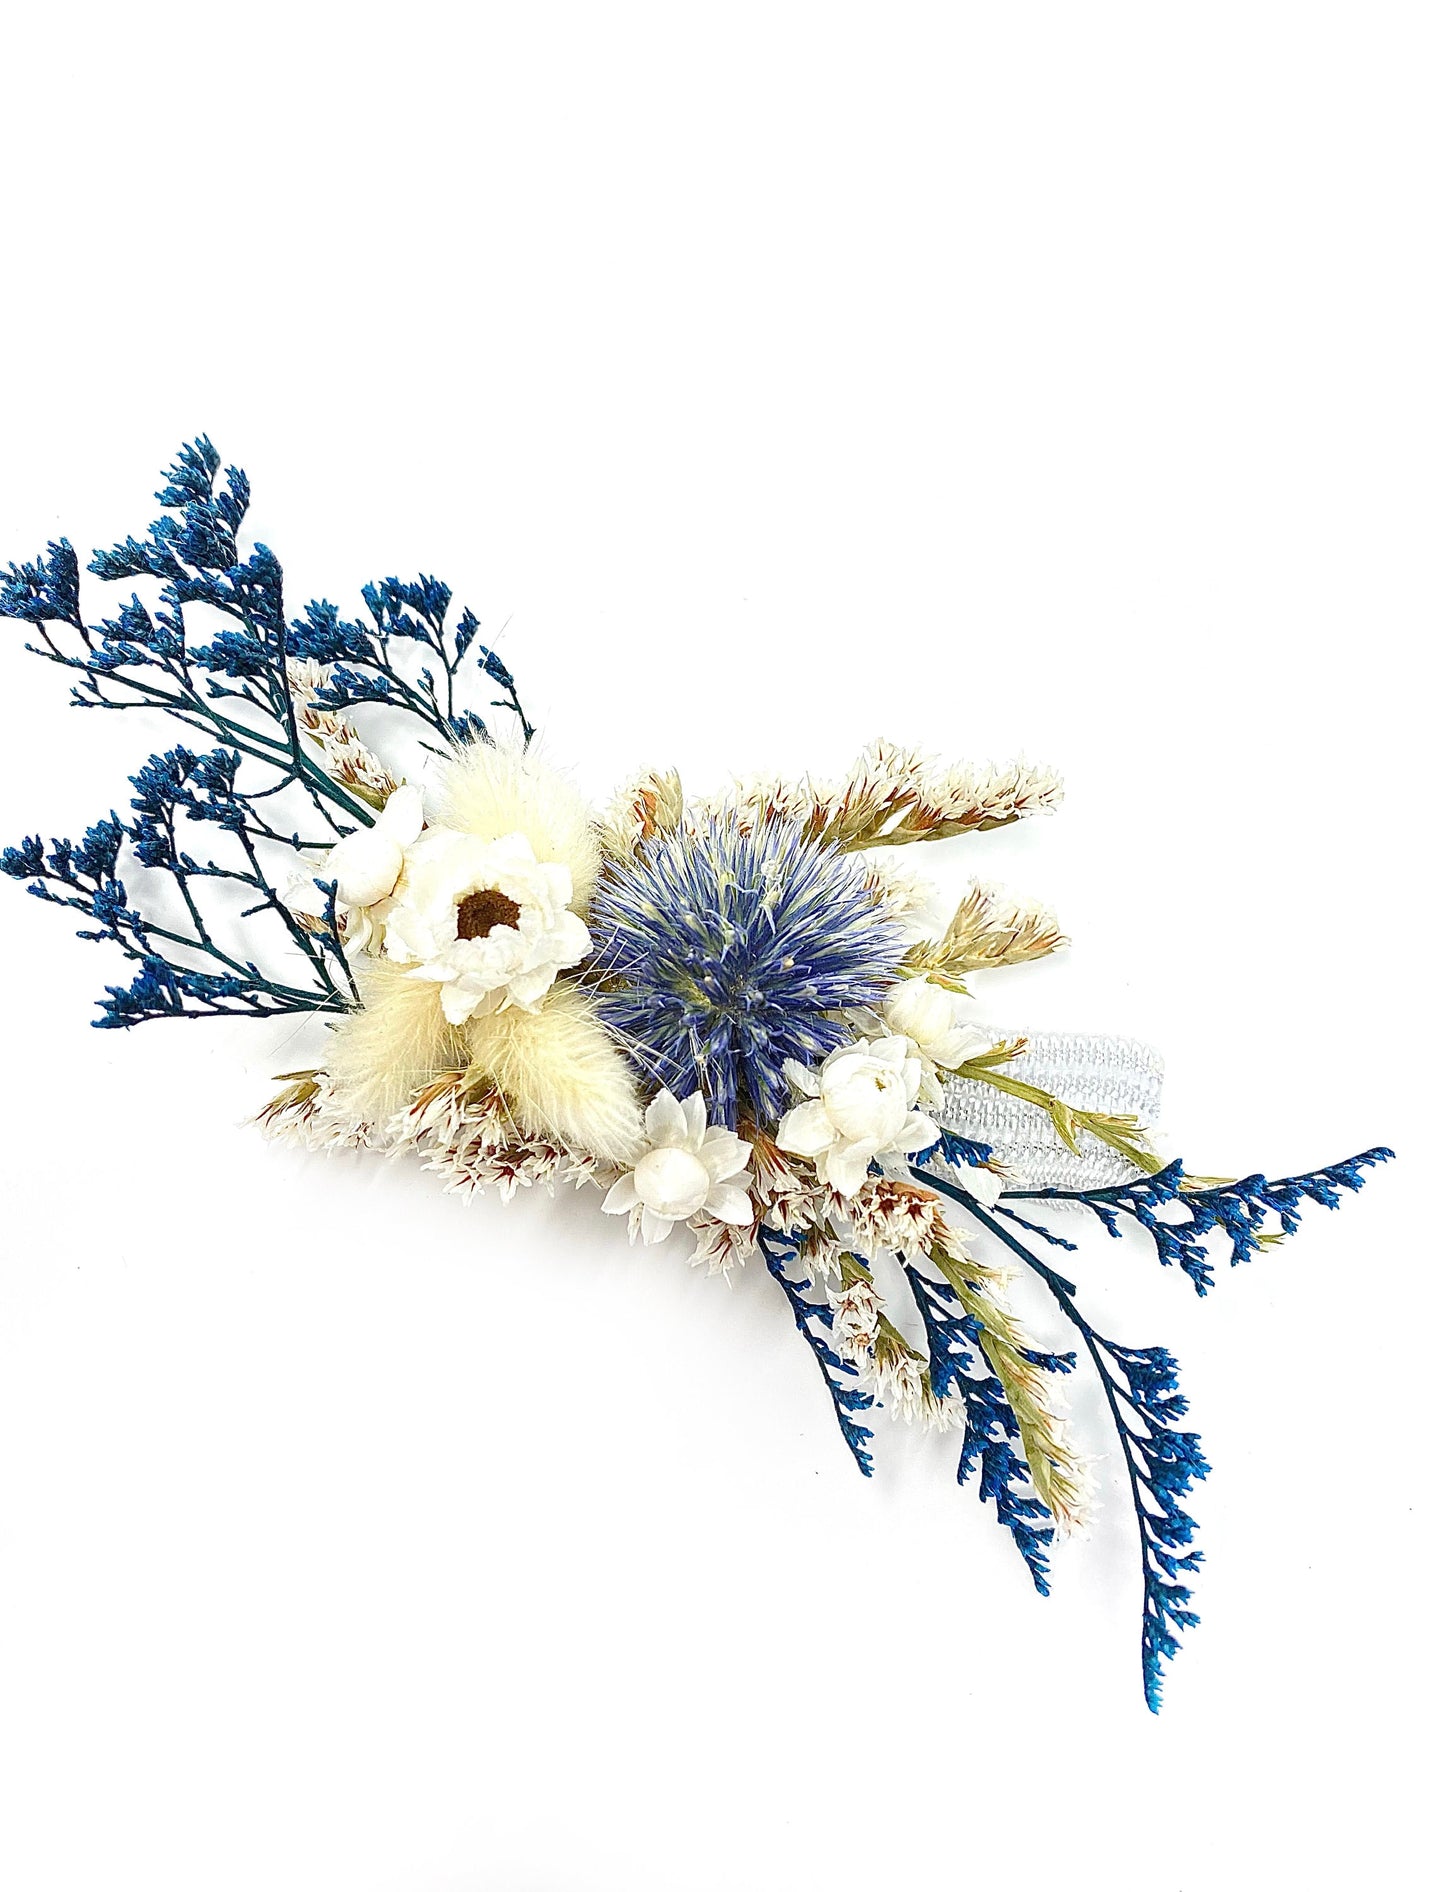 Corsage, Wedding Accessories, Dried Flowers, Preserved Floral, Blue and White, Globe Thistle, Hand Decor, Ammobium, Caspia